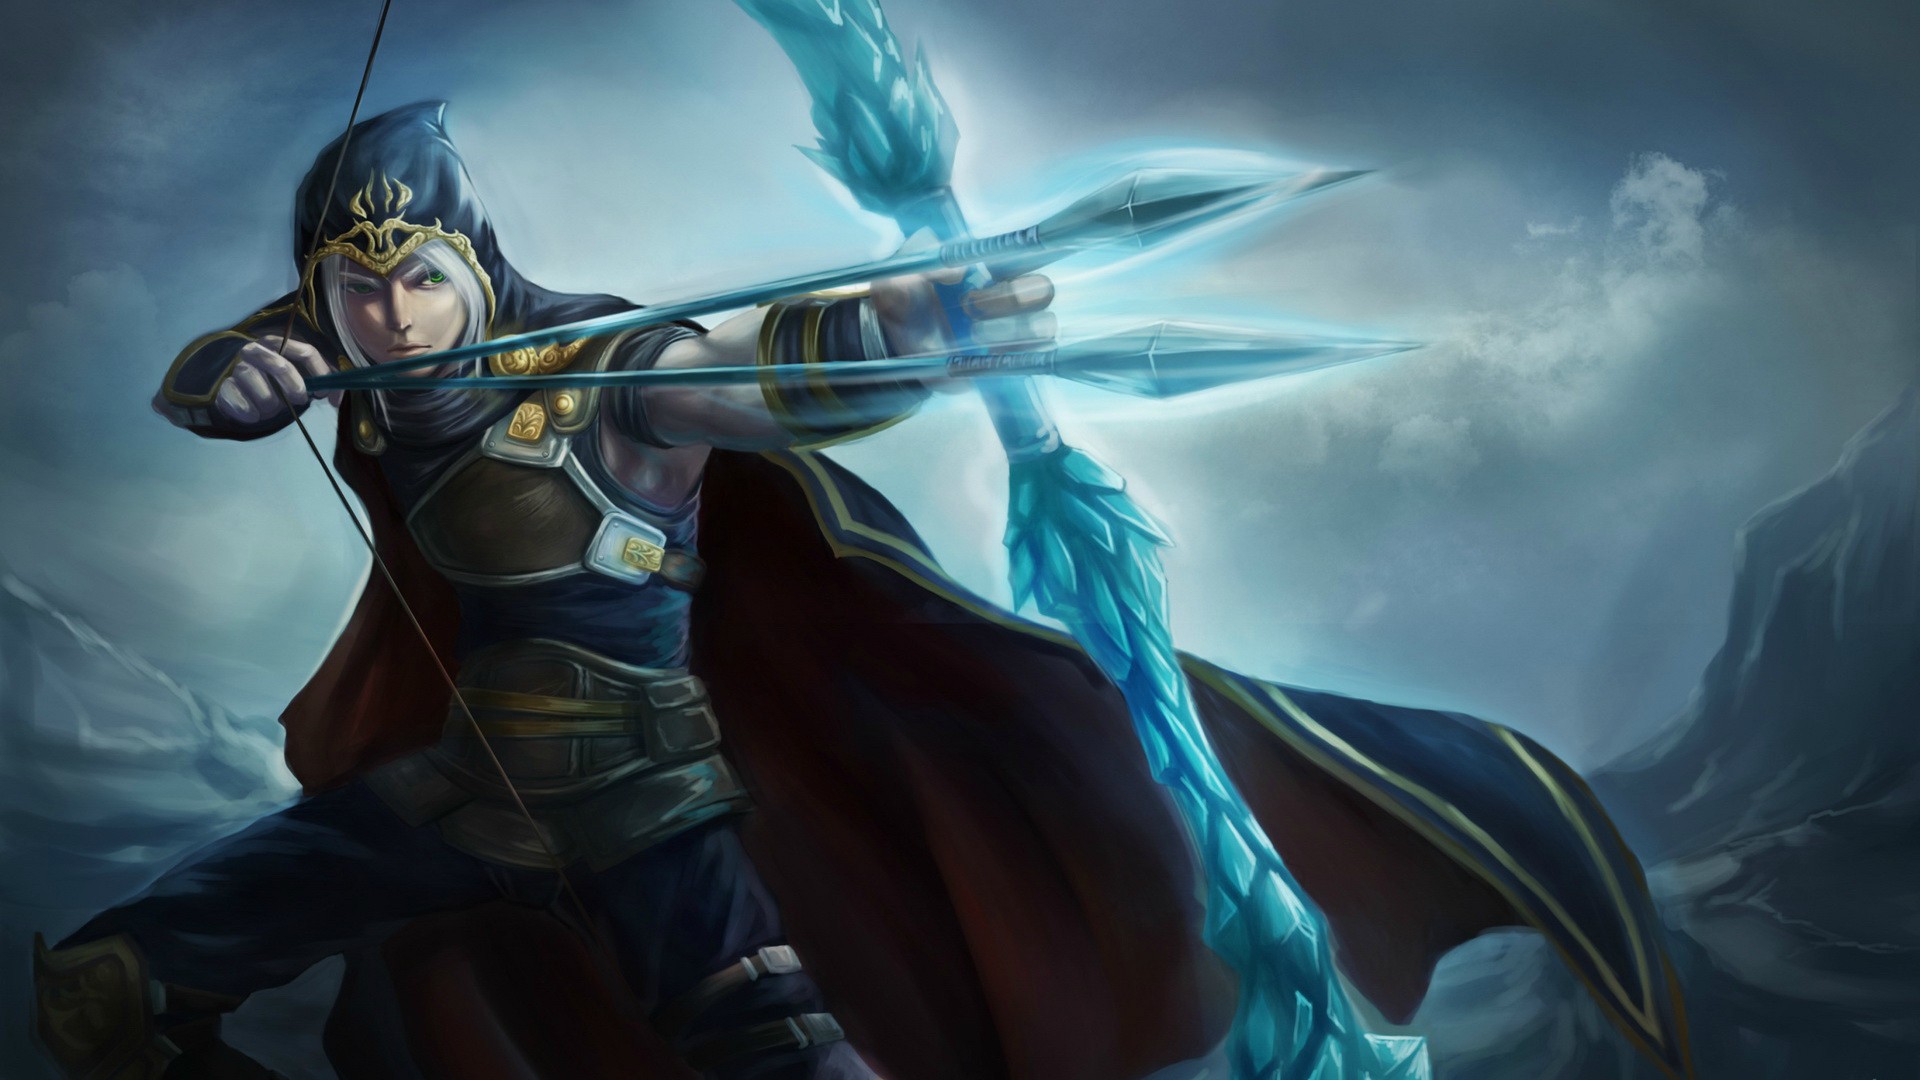  Fantasy Art League of Legends video games videogame wallpapers